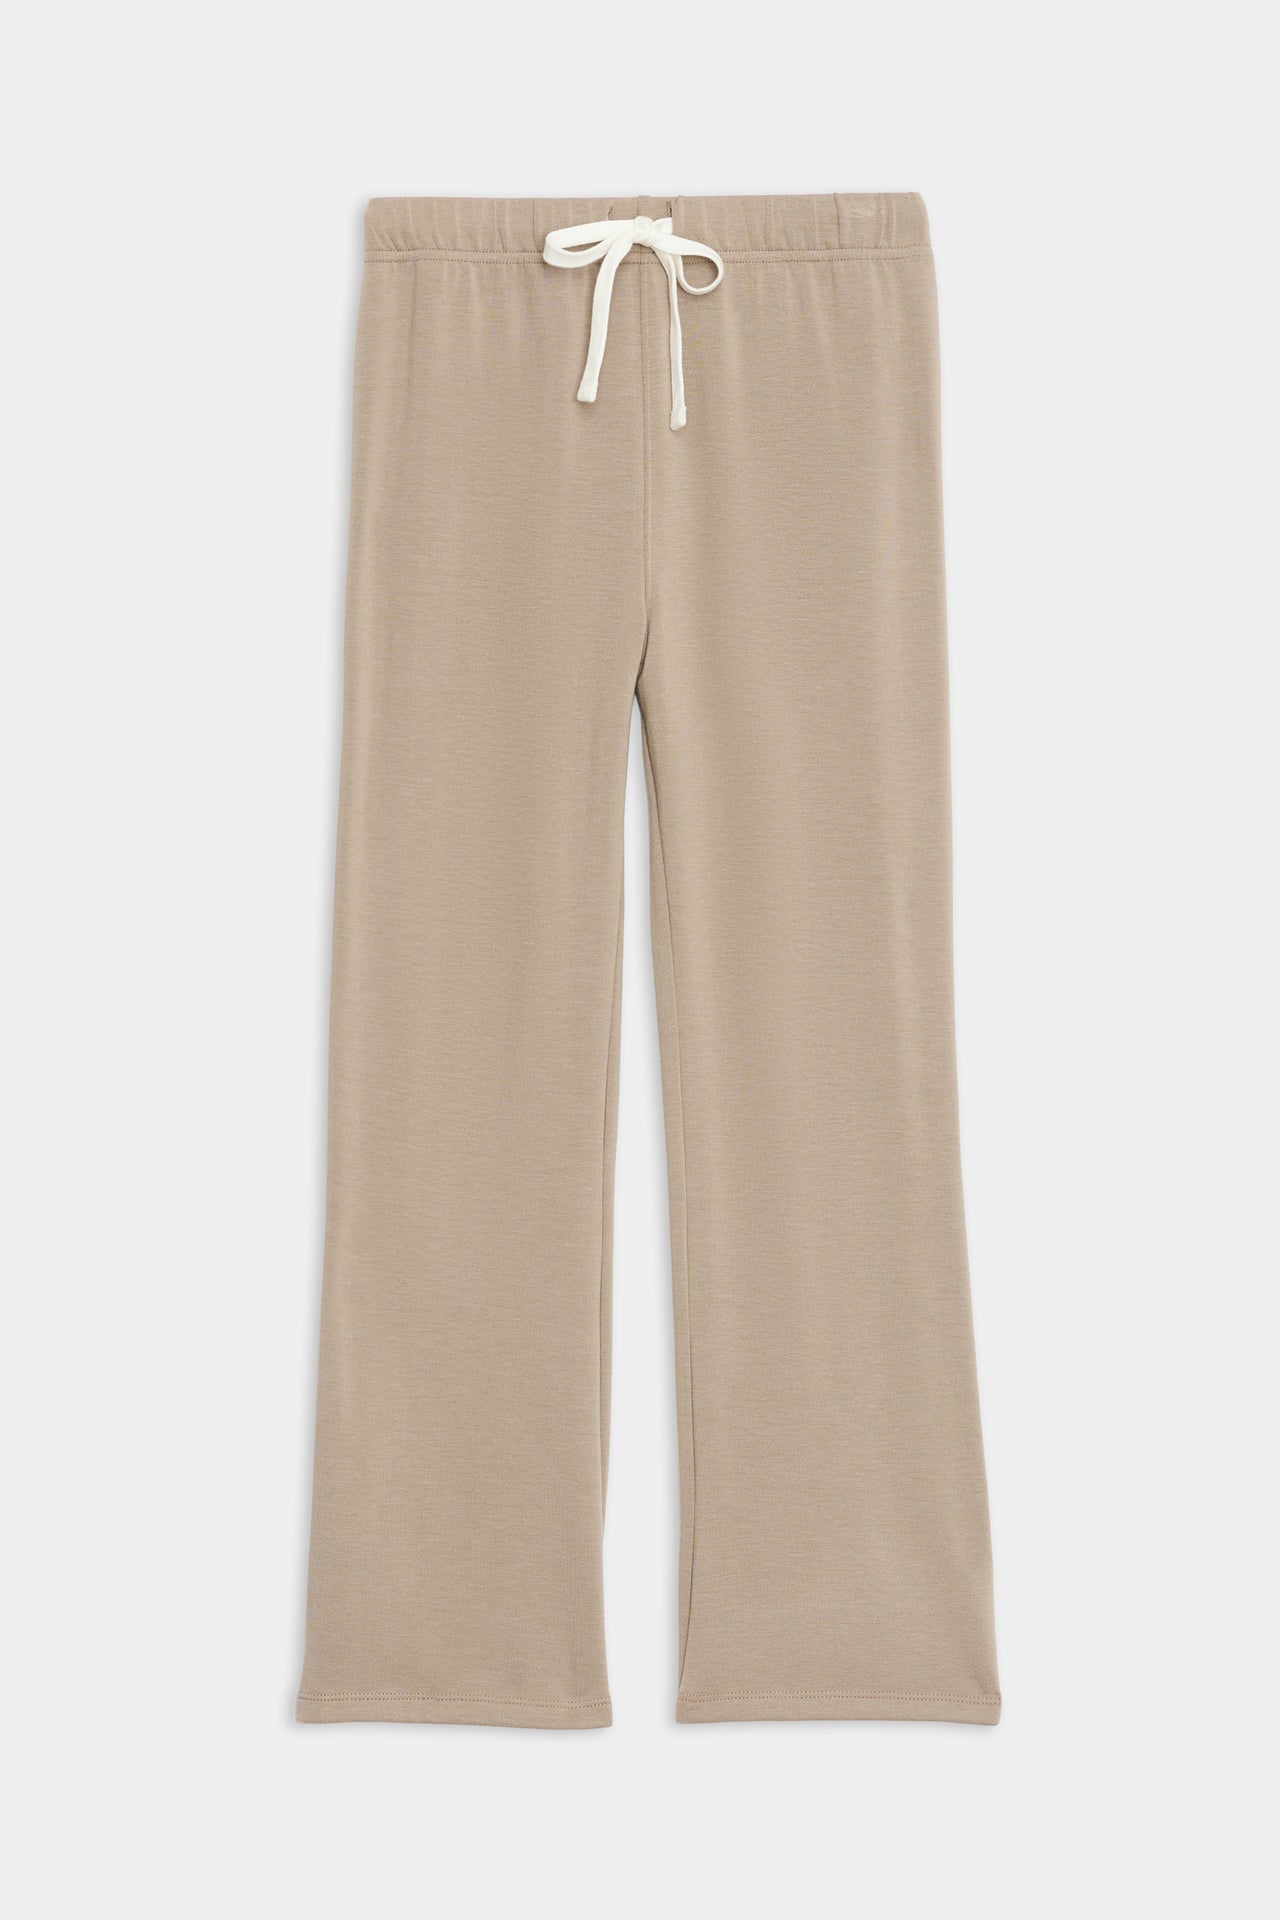 Beige Brooks Fleece Cropped Flare sweatpants crafted from comfortable modal fabric, isolated on a white background by SPLITS59.